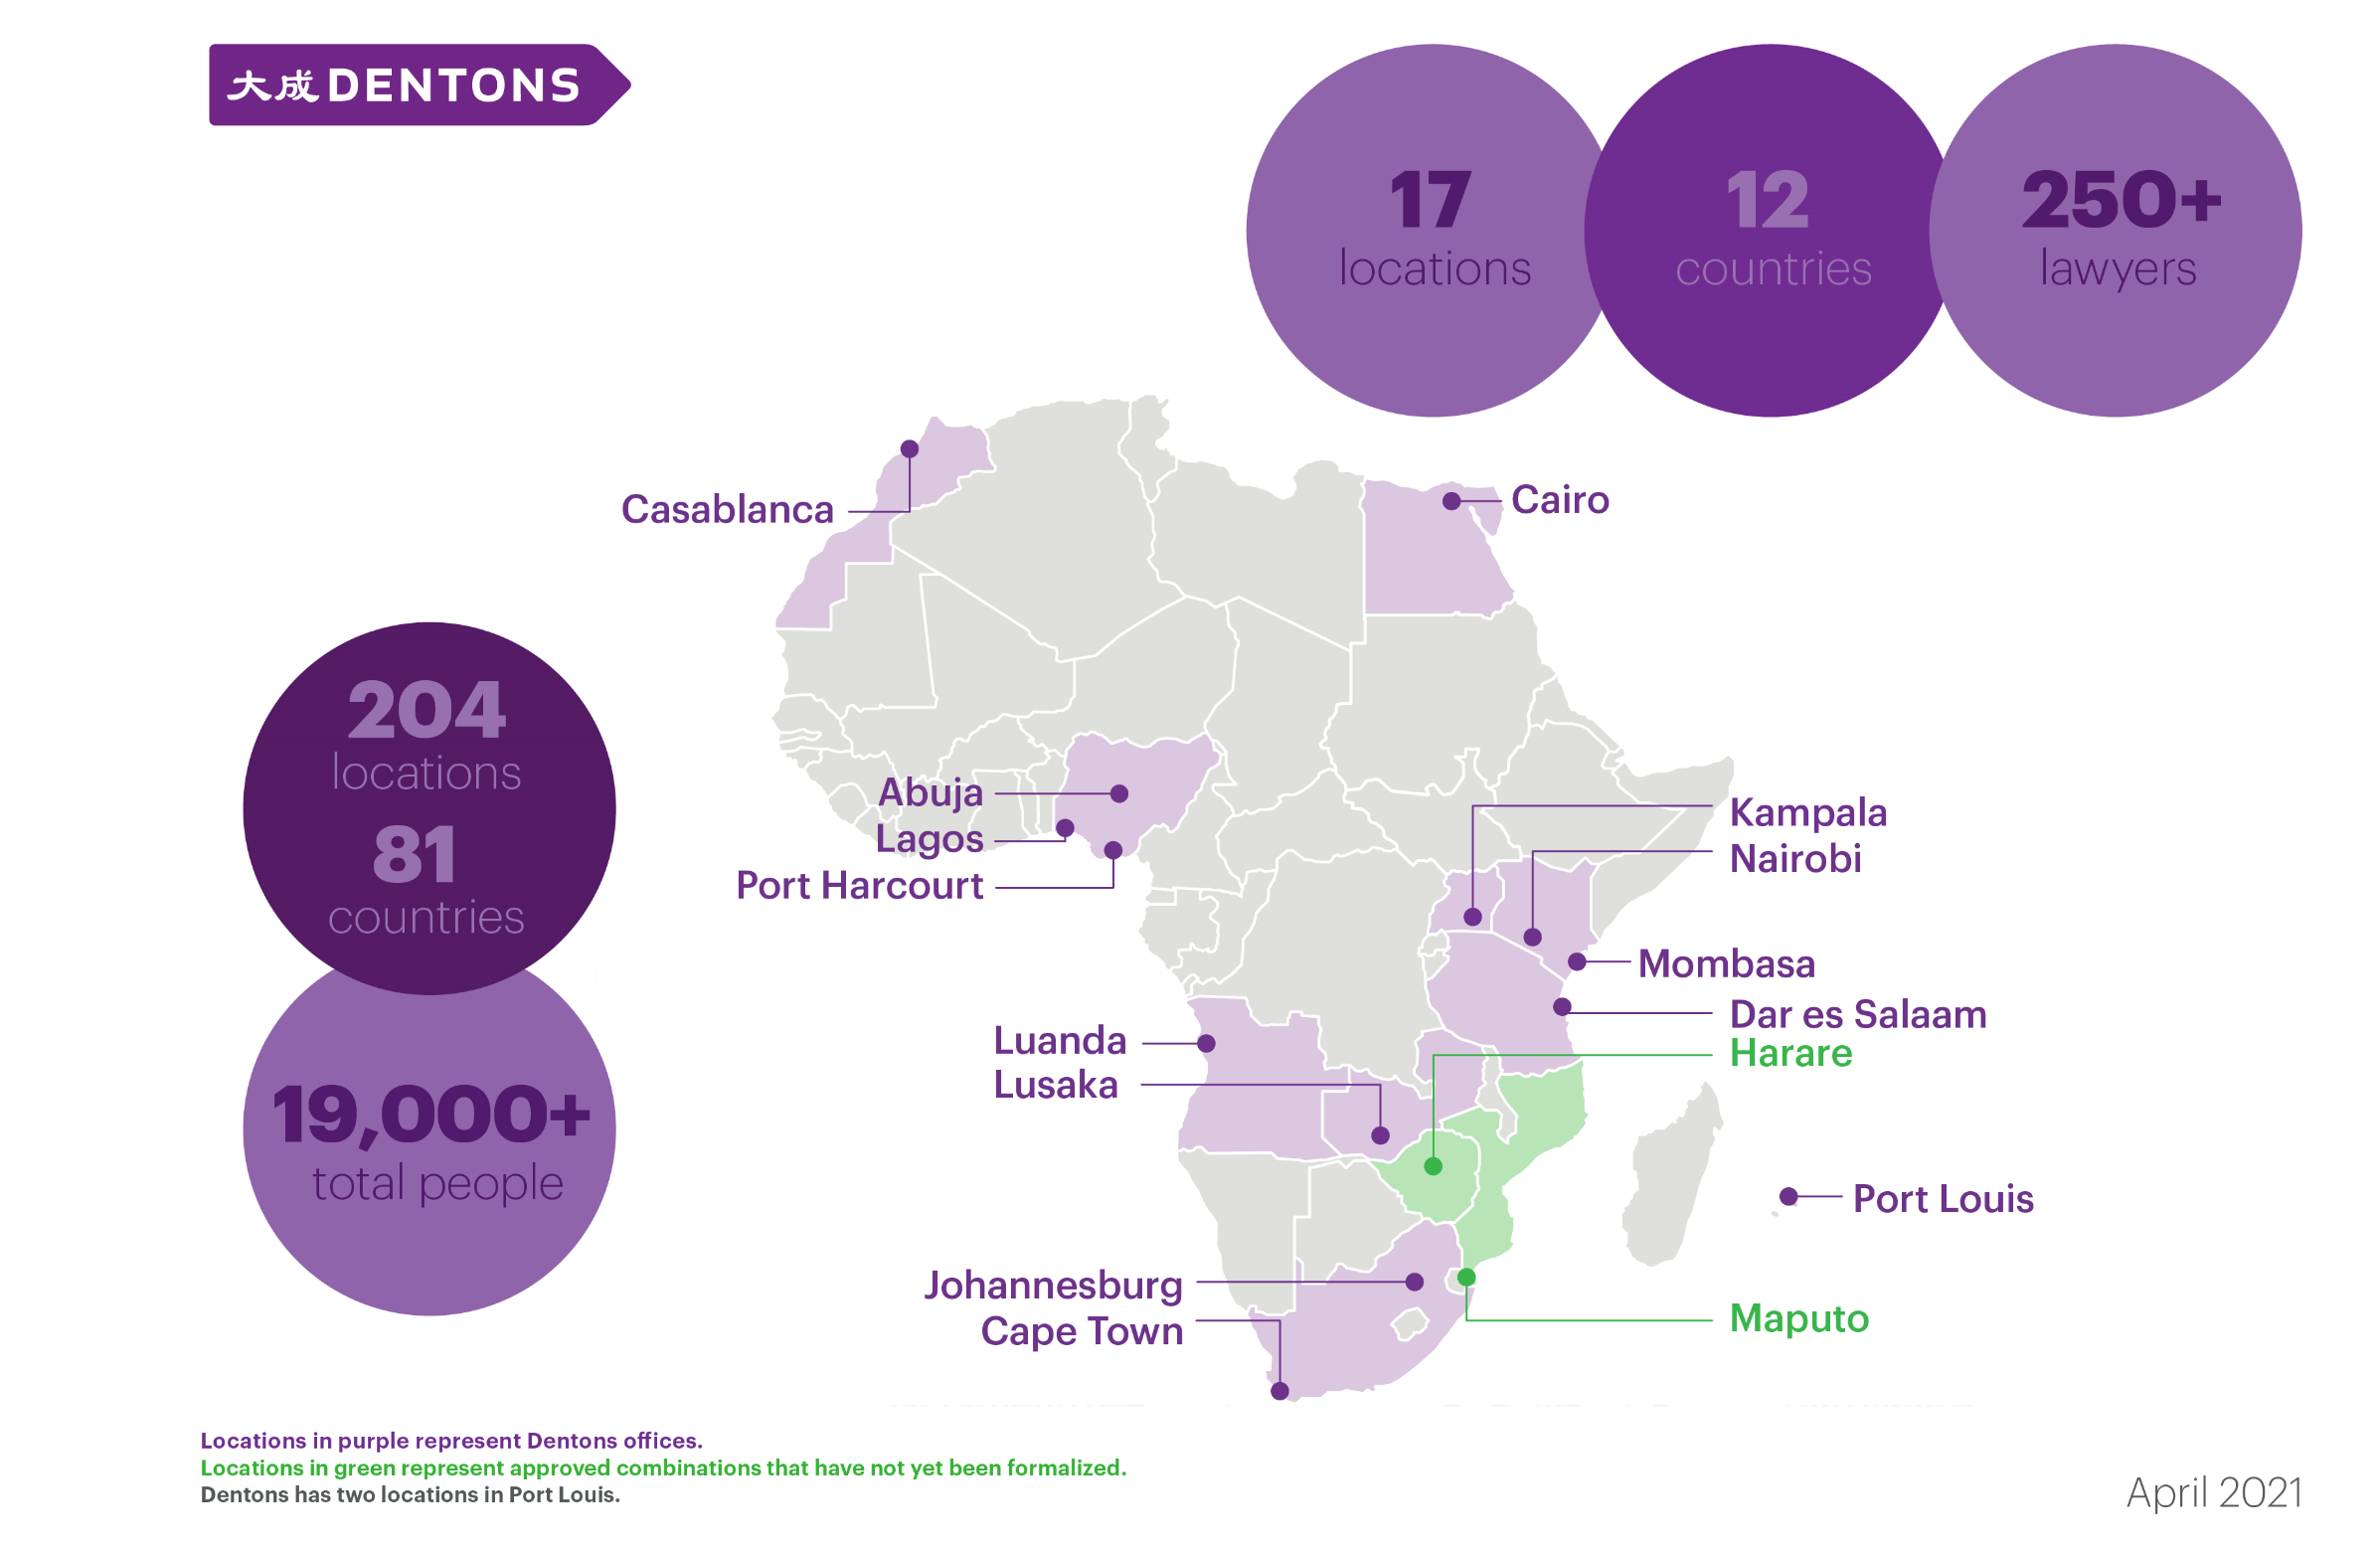 Dentons presence in Africa late April 2021